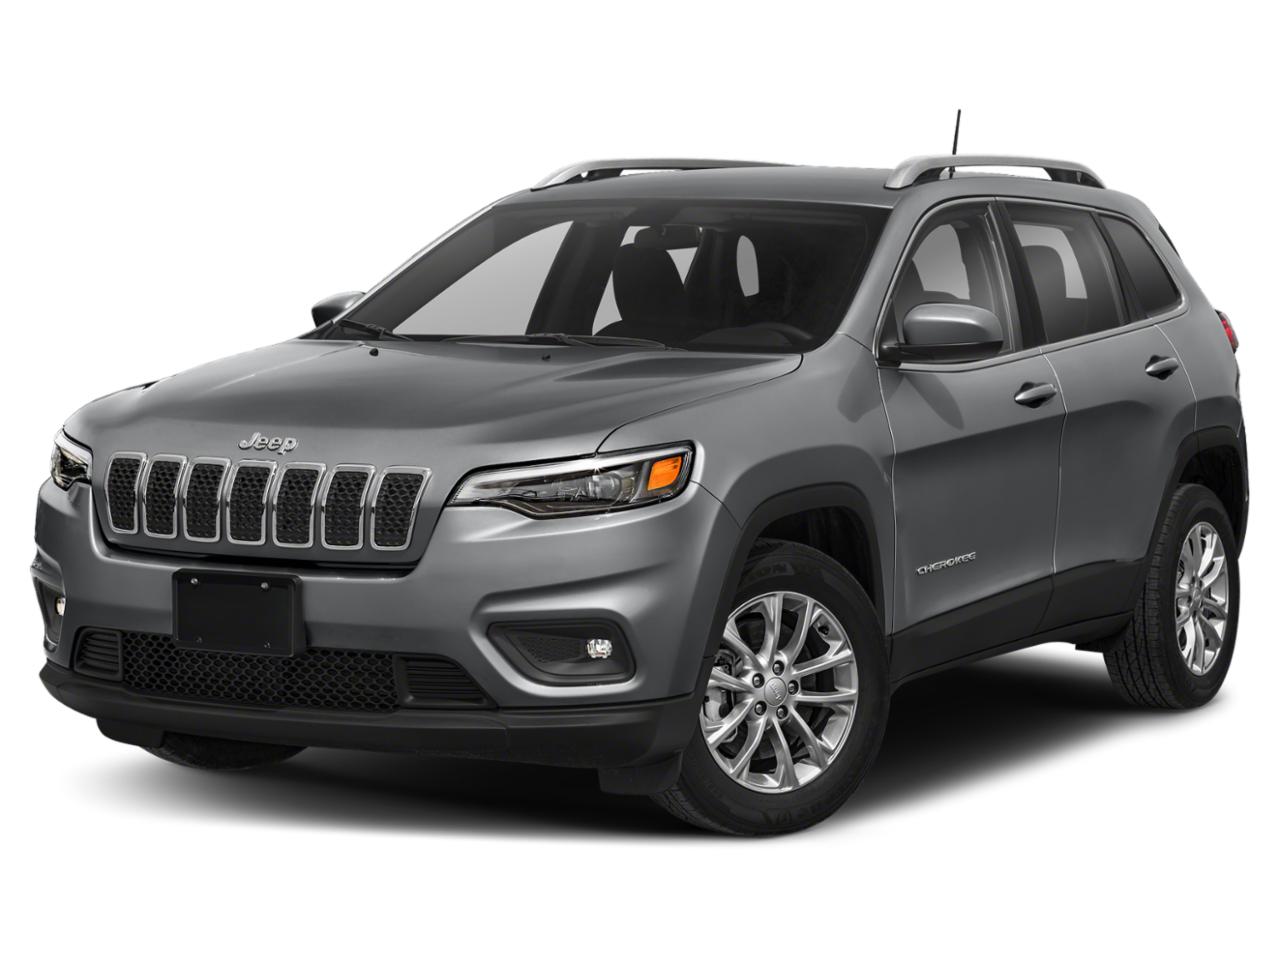 2019 Jeep Cherokee Vehicle Photo in Allentown, PA 18103